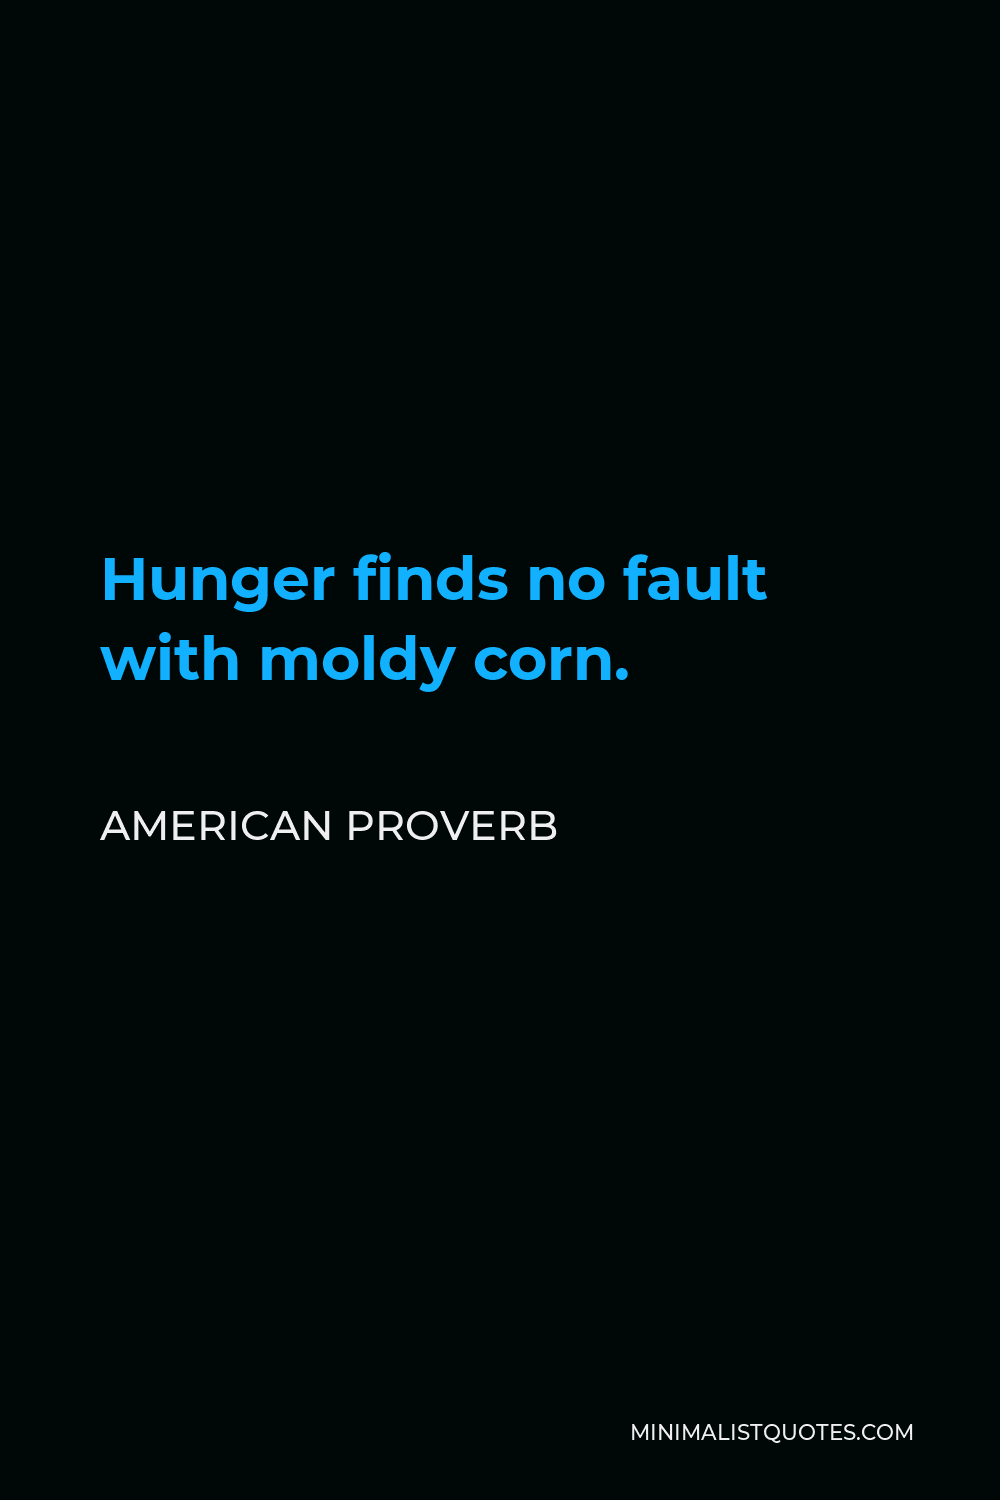 American Proverb Quote - Hunger finds no fault with moldy corn.